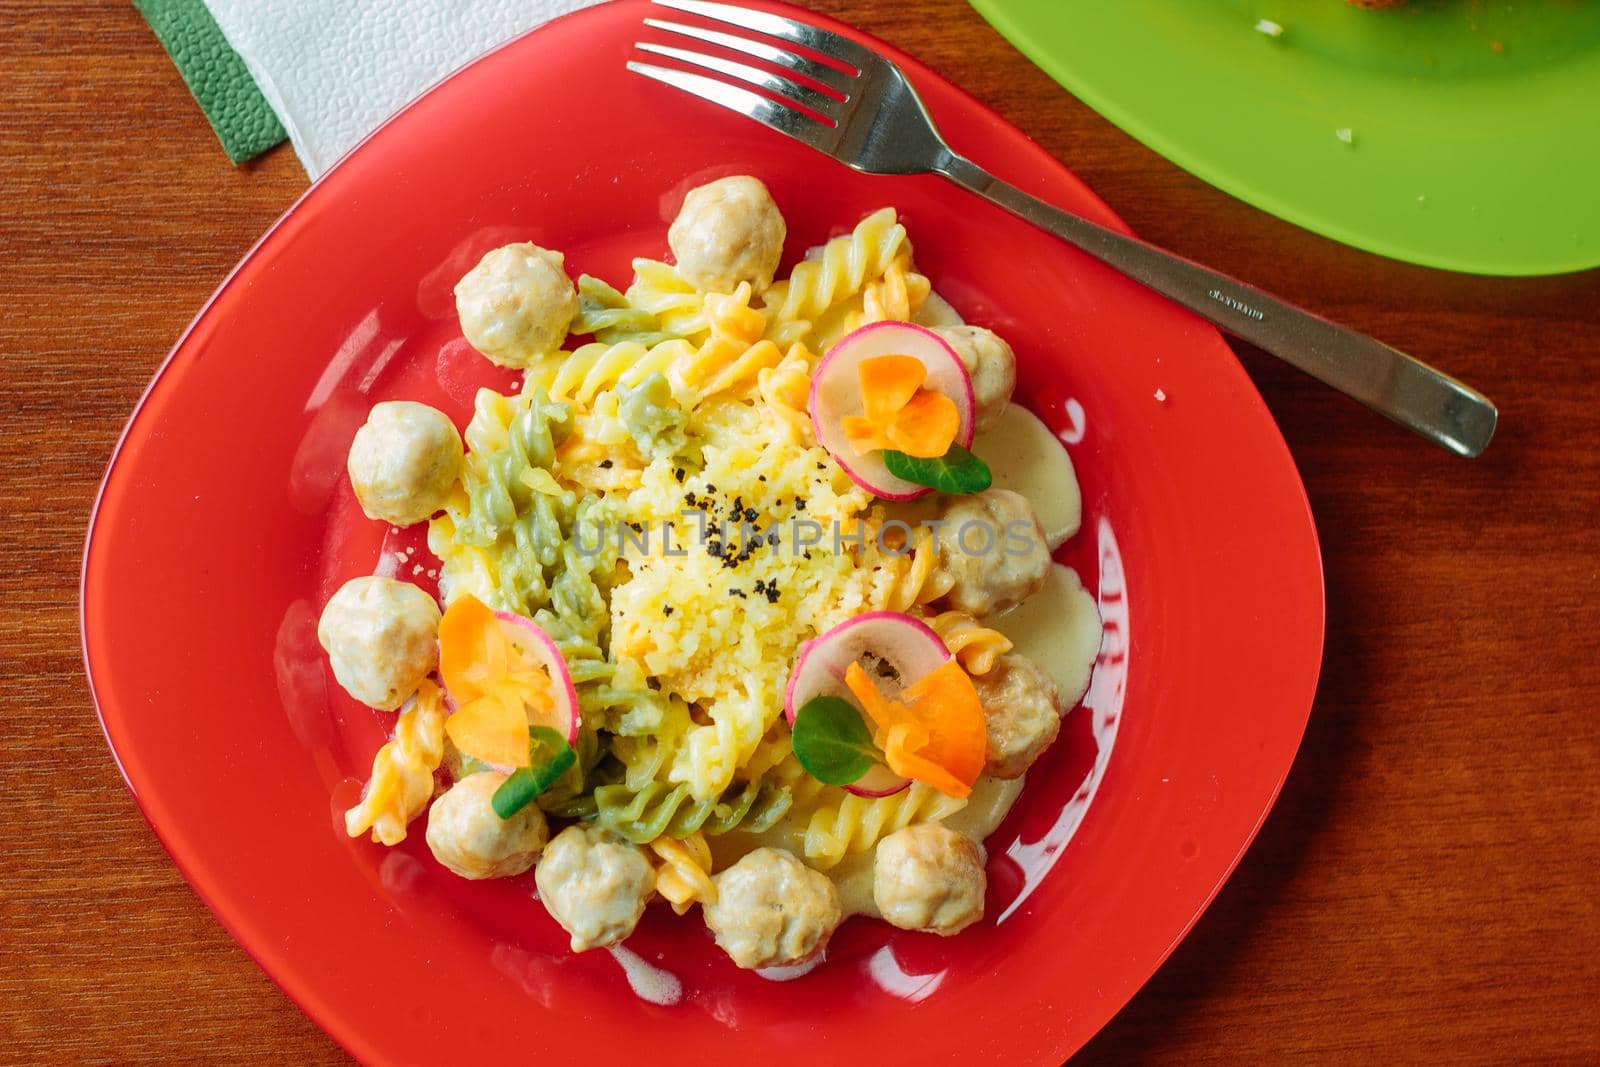 Fusilli pasta with meatballs and vegetables, great image for your needs.